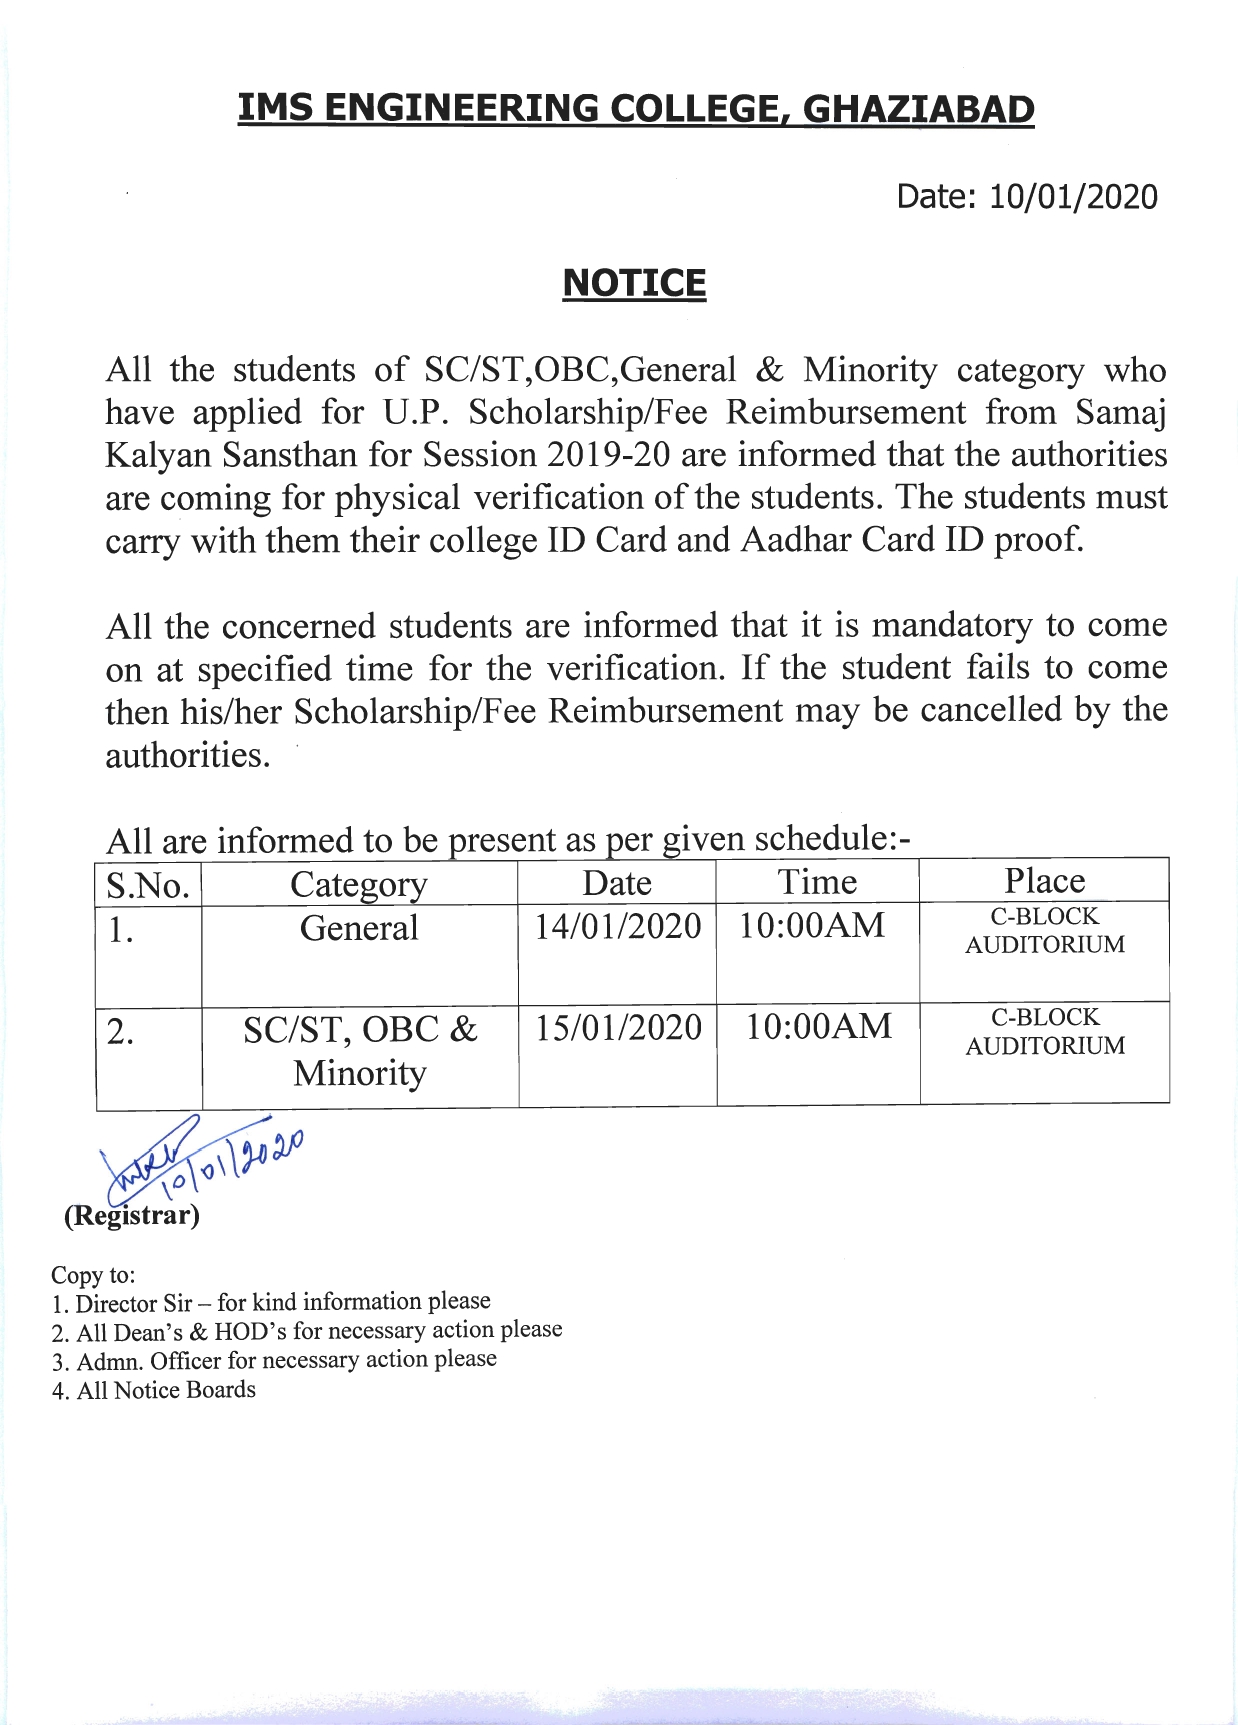 Physical Verification for scholarship -Session 2019-20